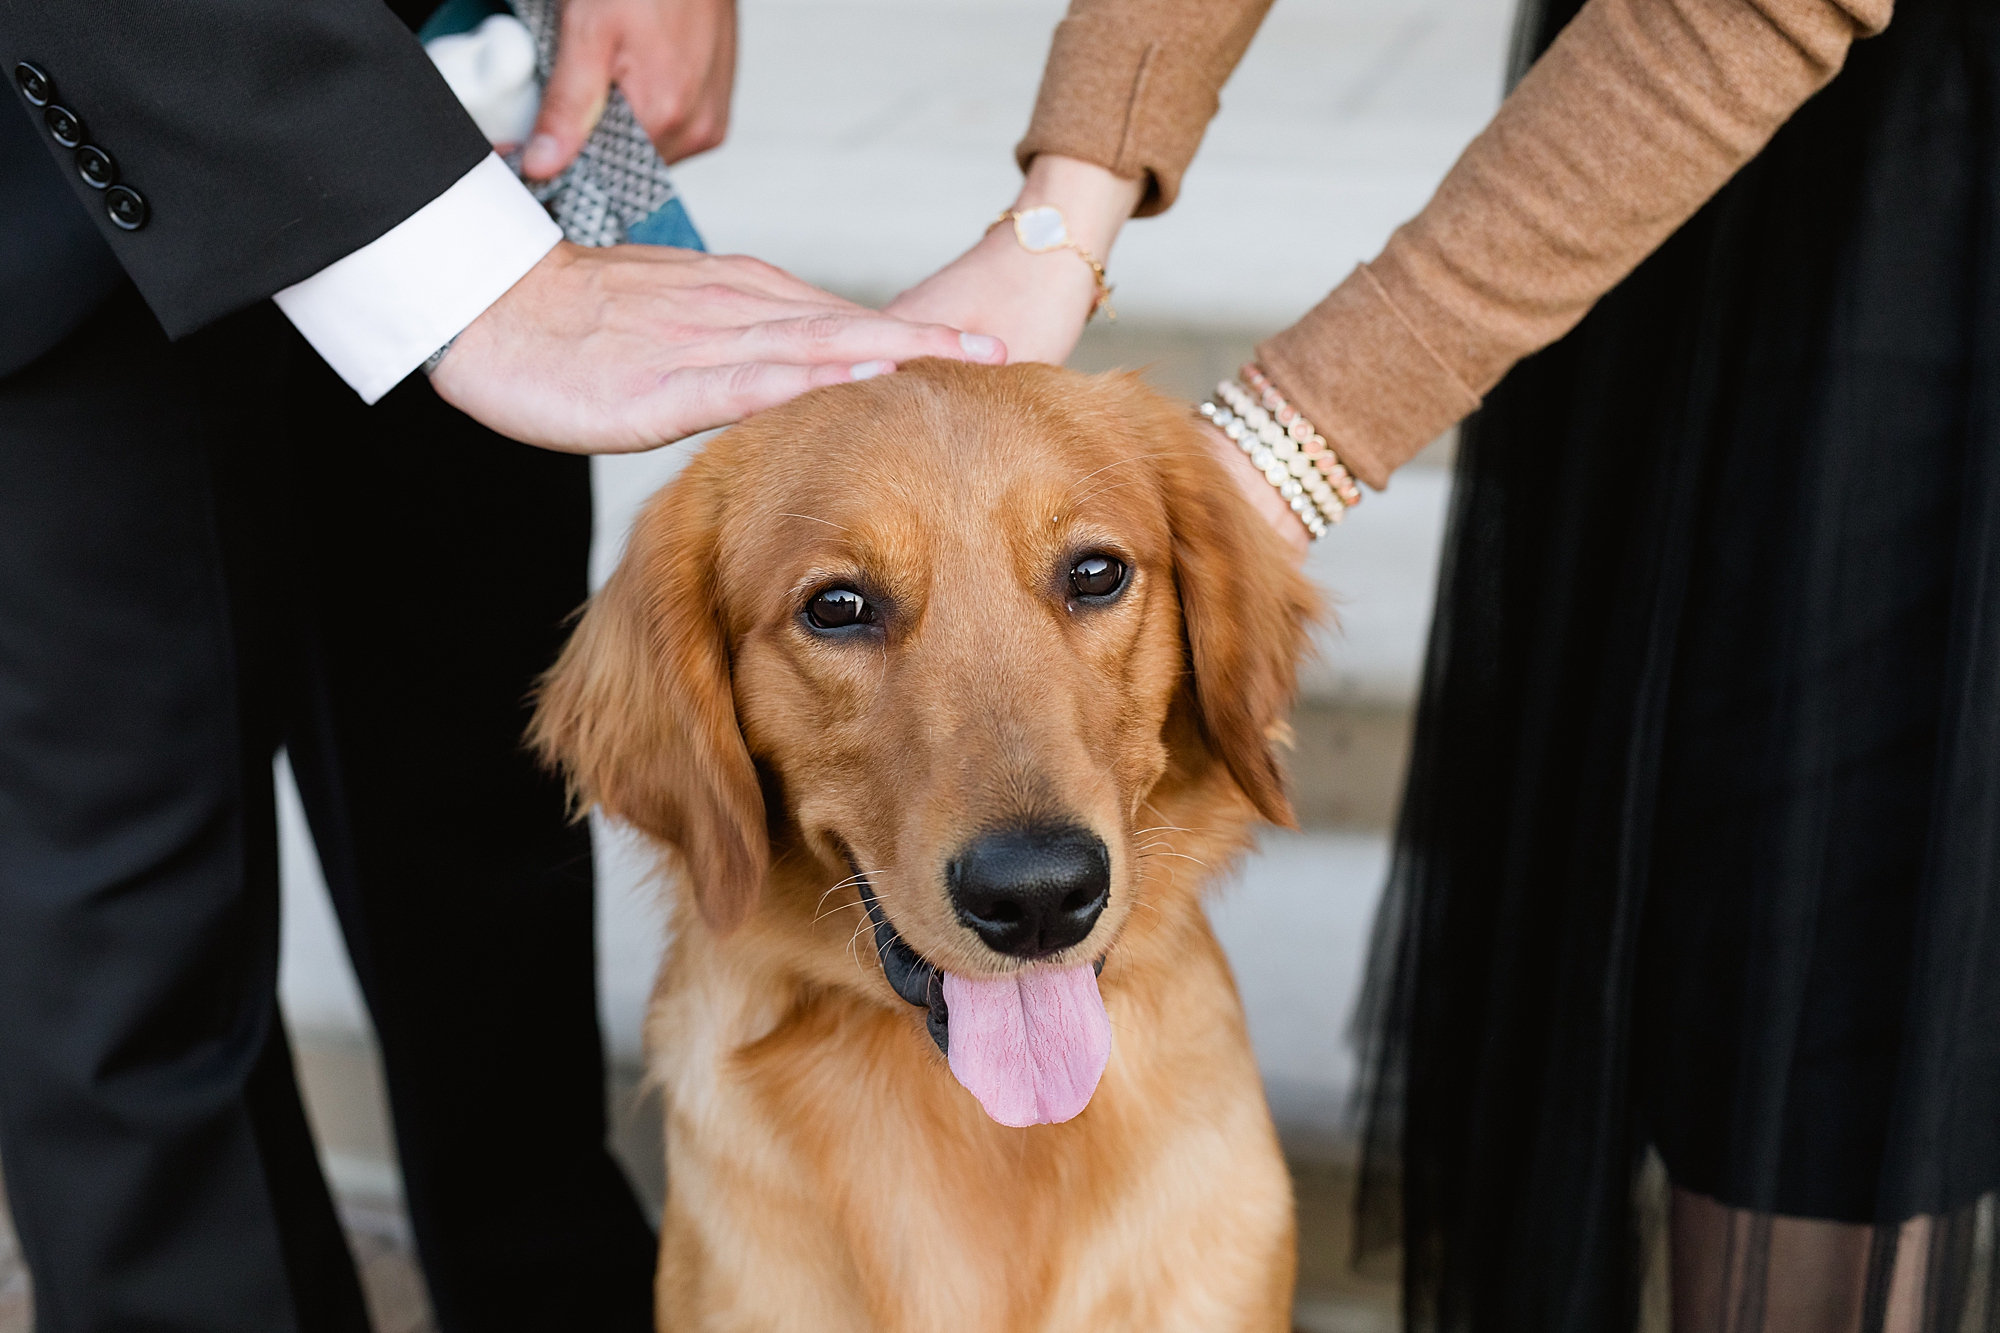 Elegant engagement session with golden retriever dog at War Memorial - Breanne Rochelle Photography